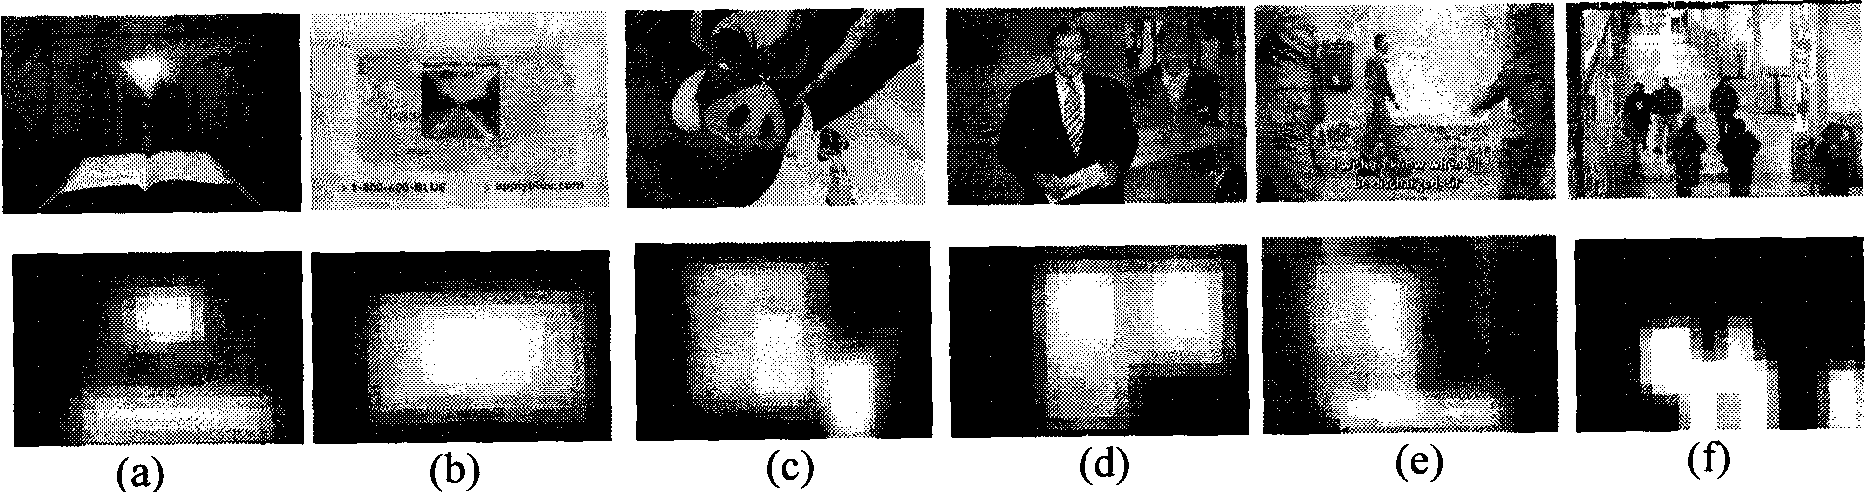 Method for automatically estimating visual significance of image and video